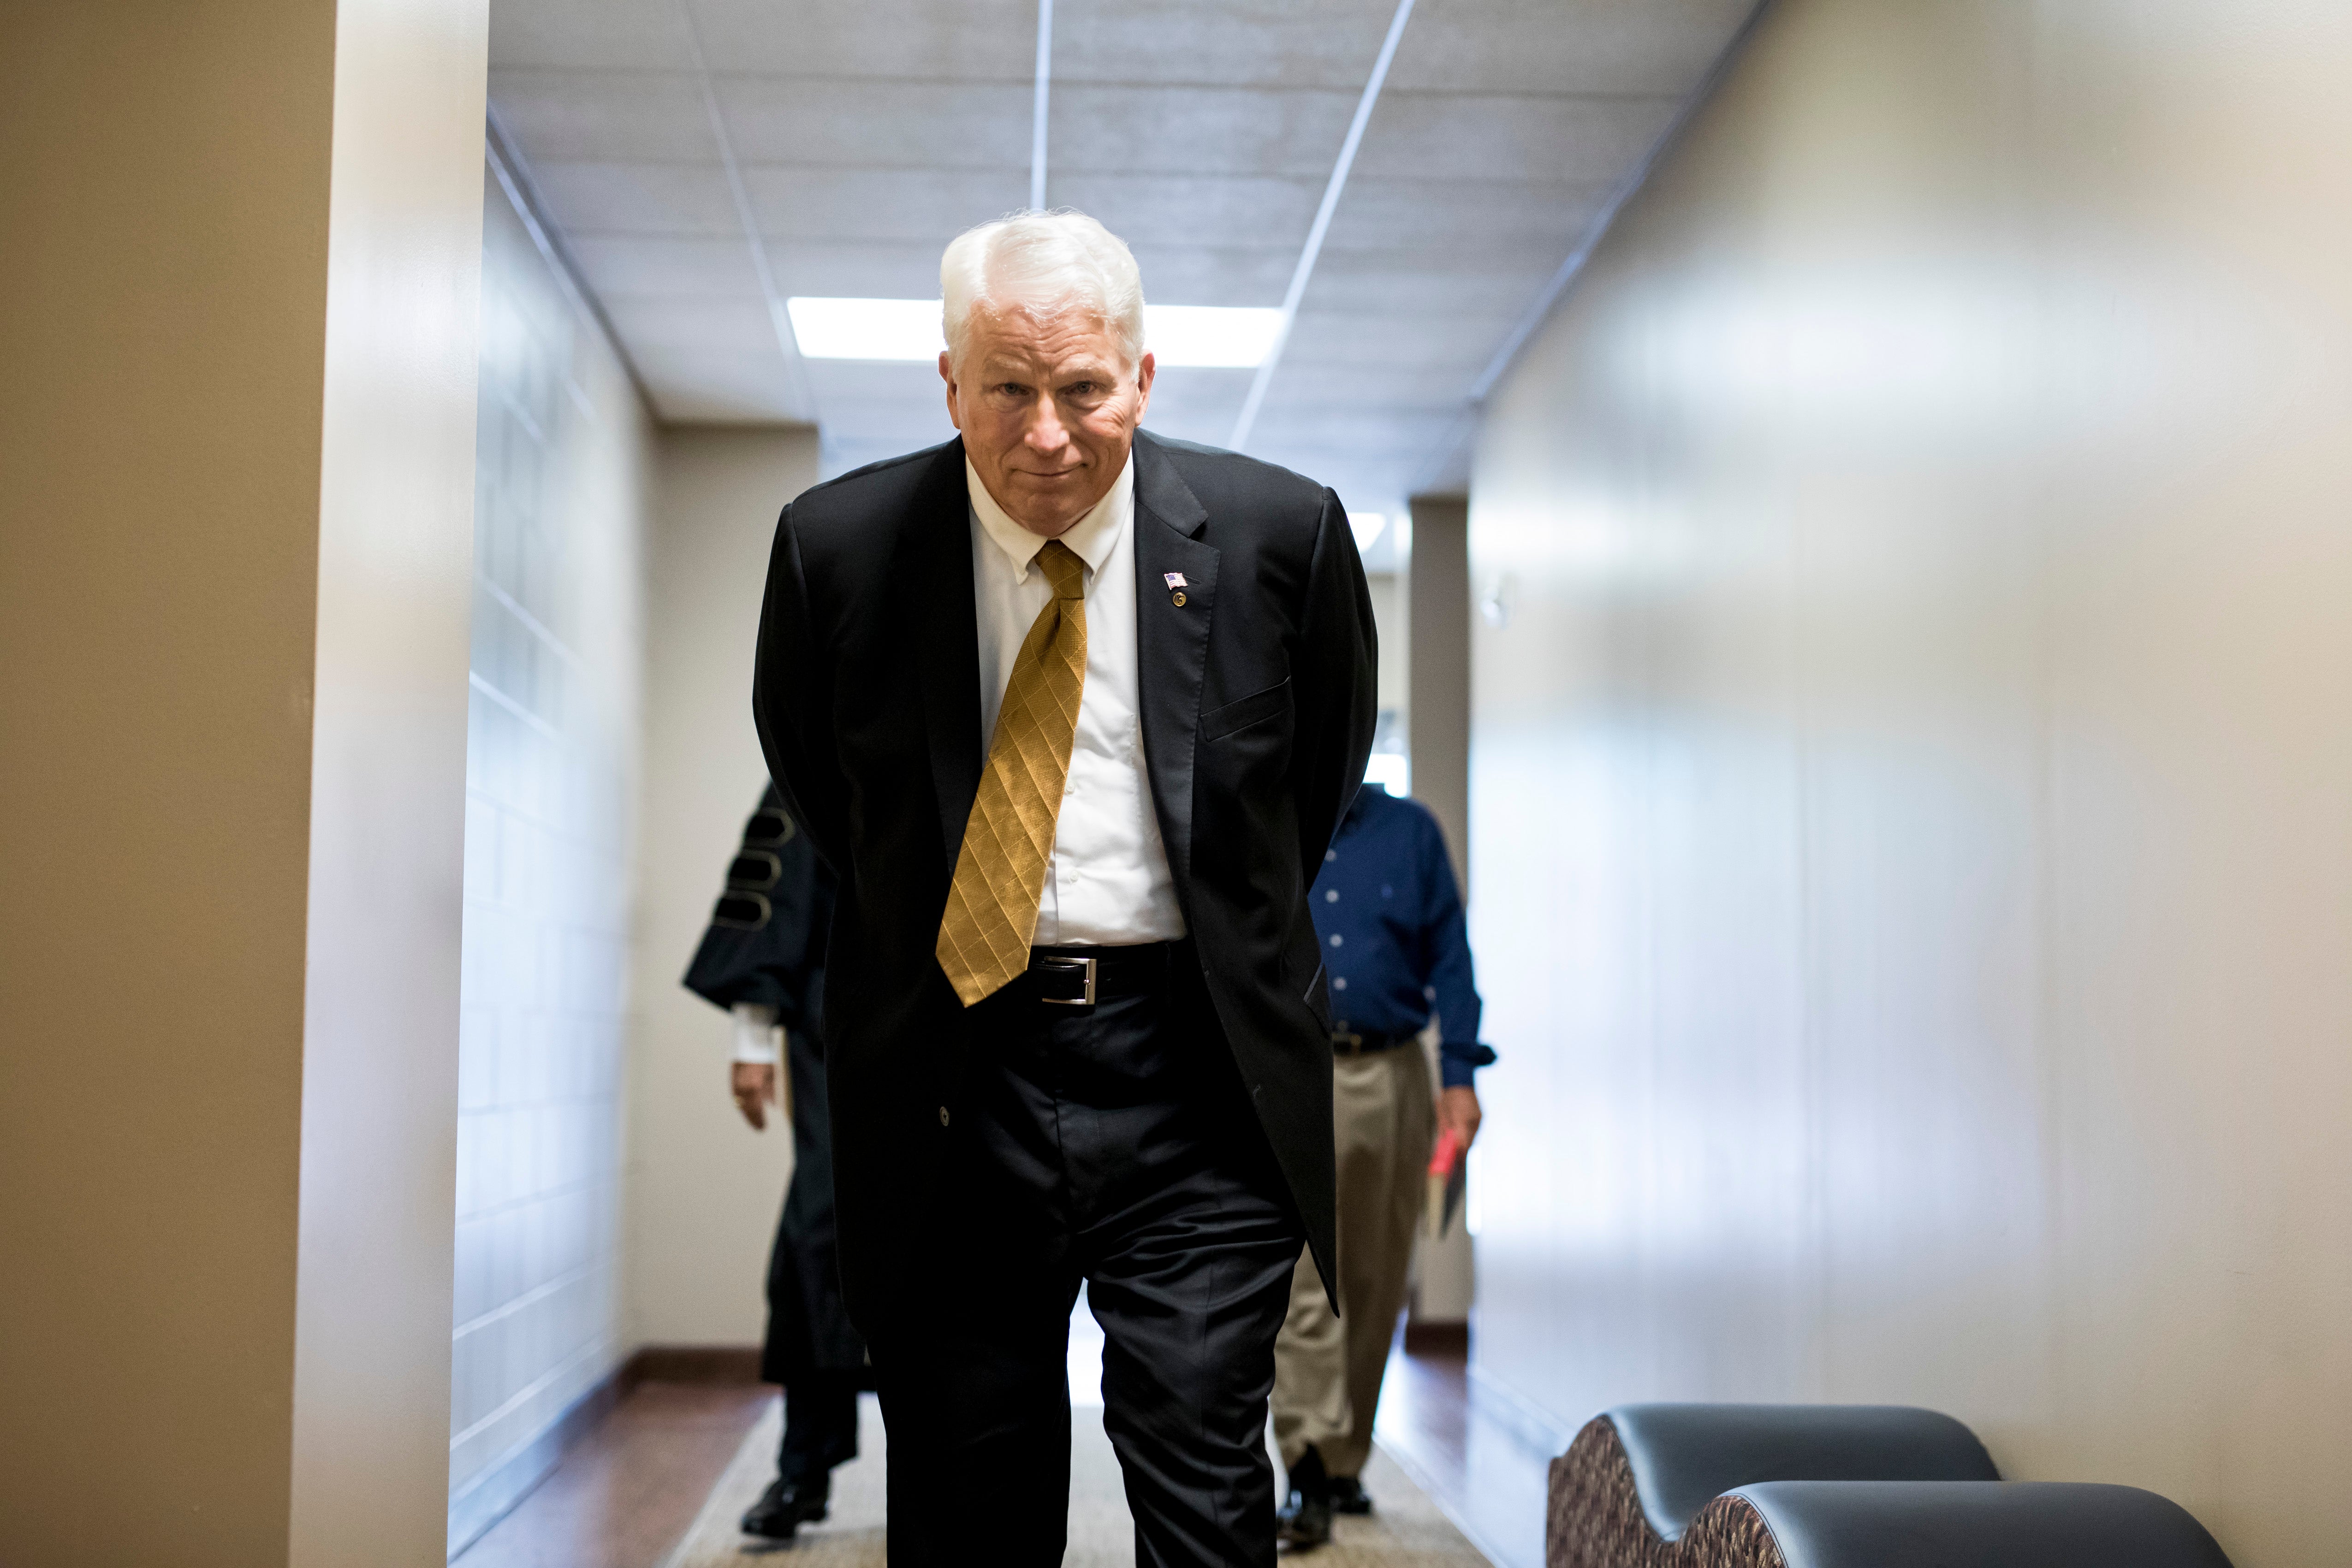 John C. Hitt wears a suit as he walks down a hallway with his hands behind his back.